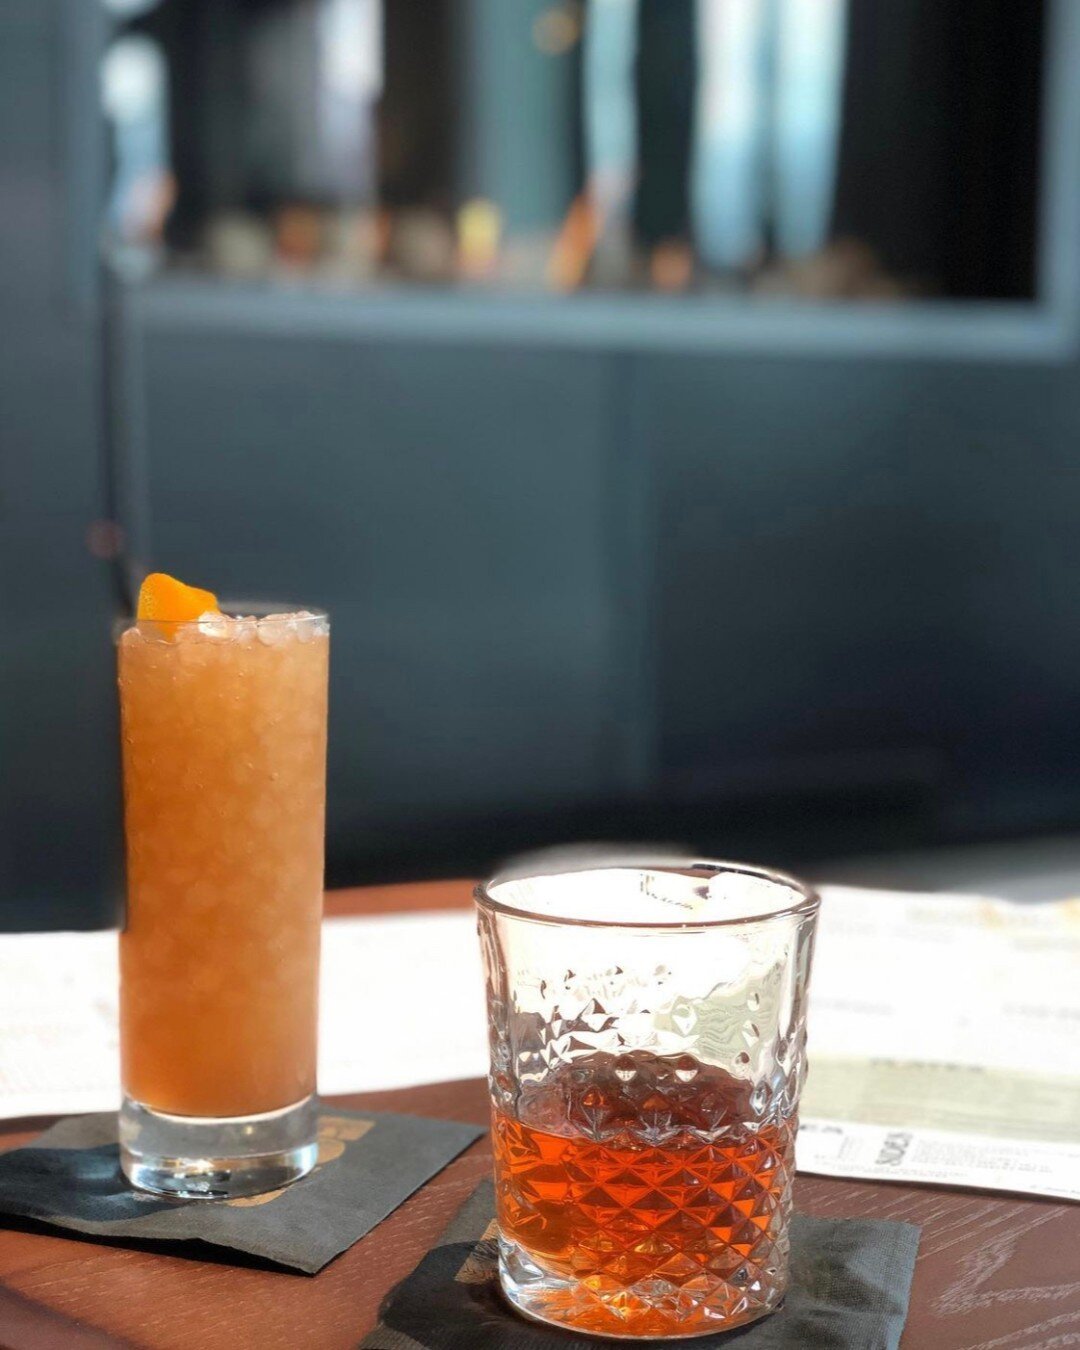 Join us for a robust selection of California wines, craft beers, and a cocktail menu highlighting famous drinks from around the globe.
.
📸: @sactownwinoandfoodie
.
#fourpalmsbar #fortsutterhotel #spiritofsacramento #heartofmidtown #exploremidtown #t